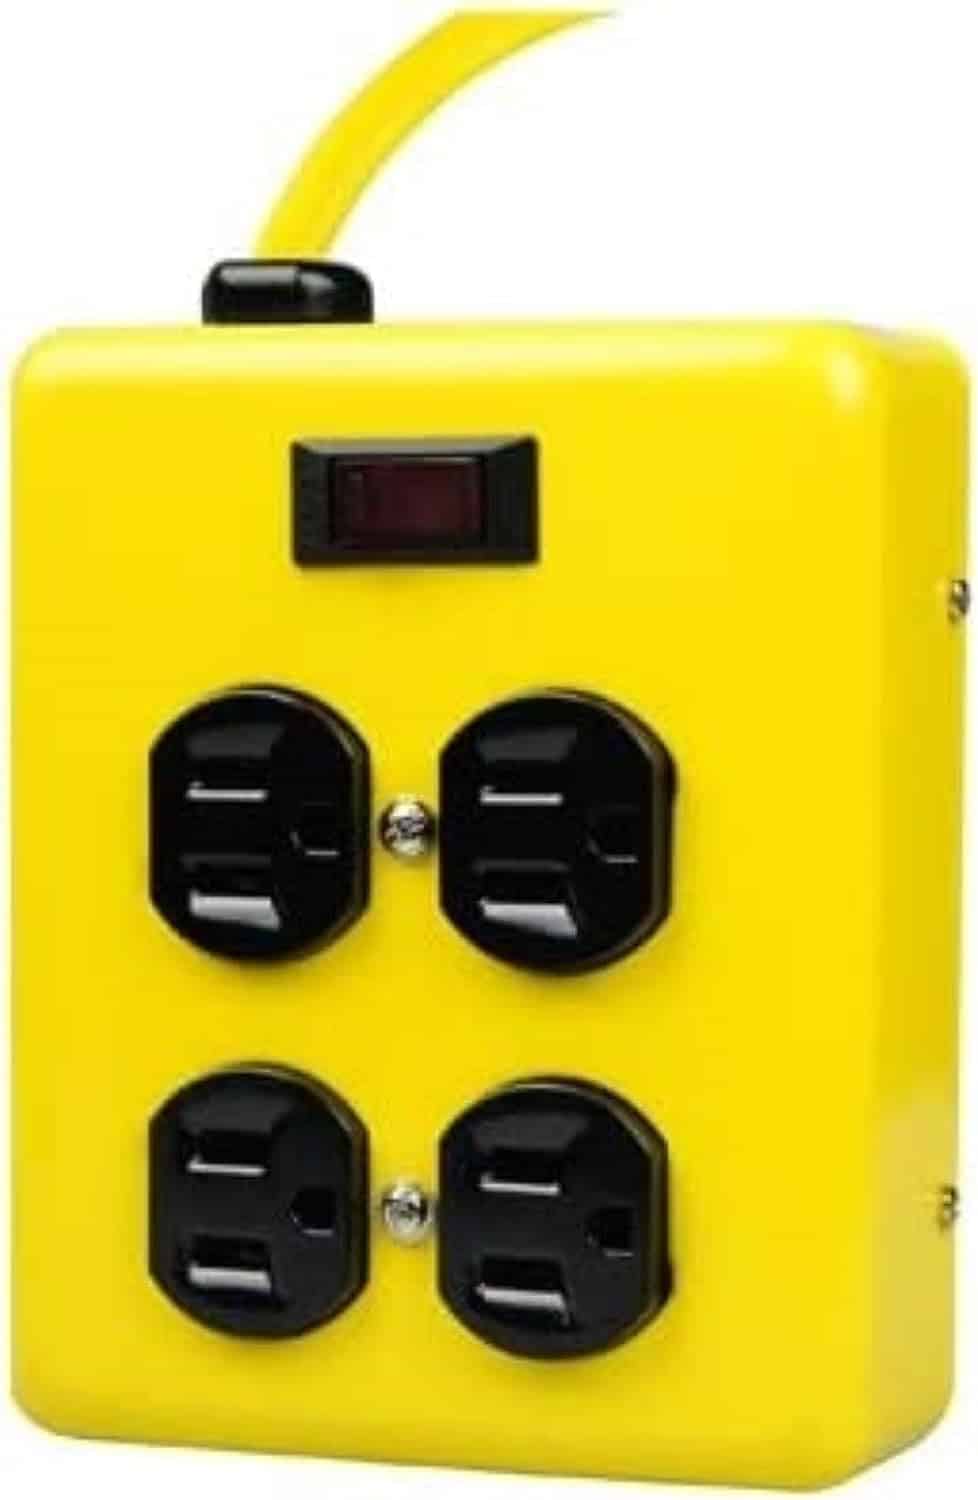 Yellow-Jacket-2177N-Metal-Power-Block-with-4-Outlets-and-Lighted-Switch-4-foot-Cord